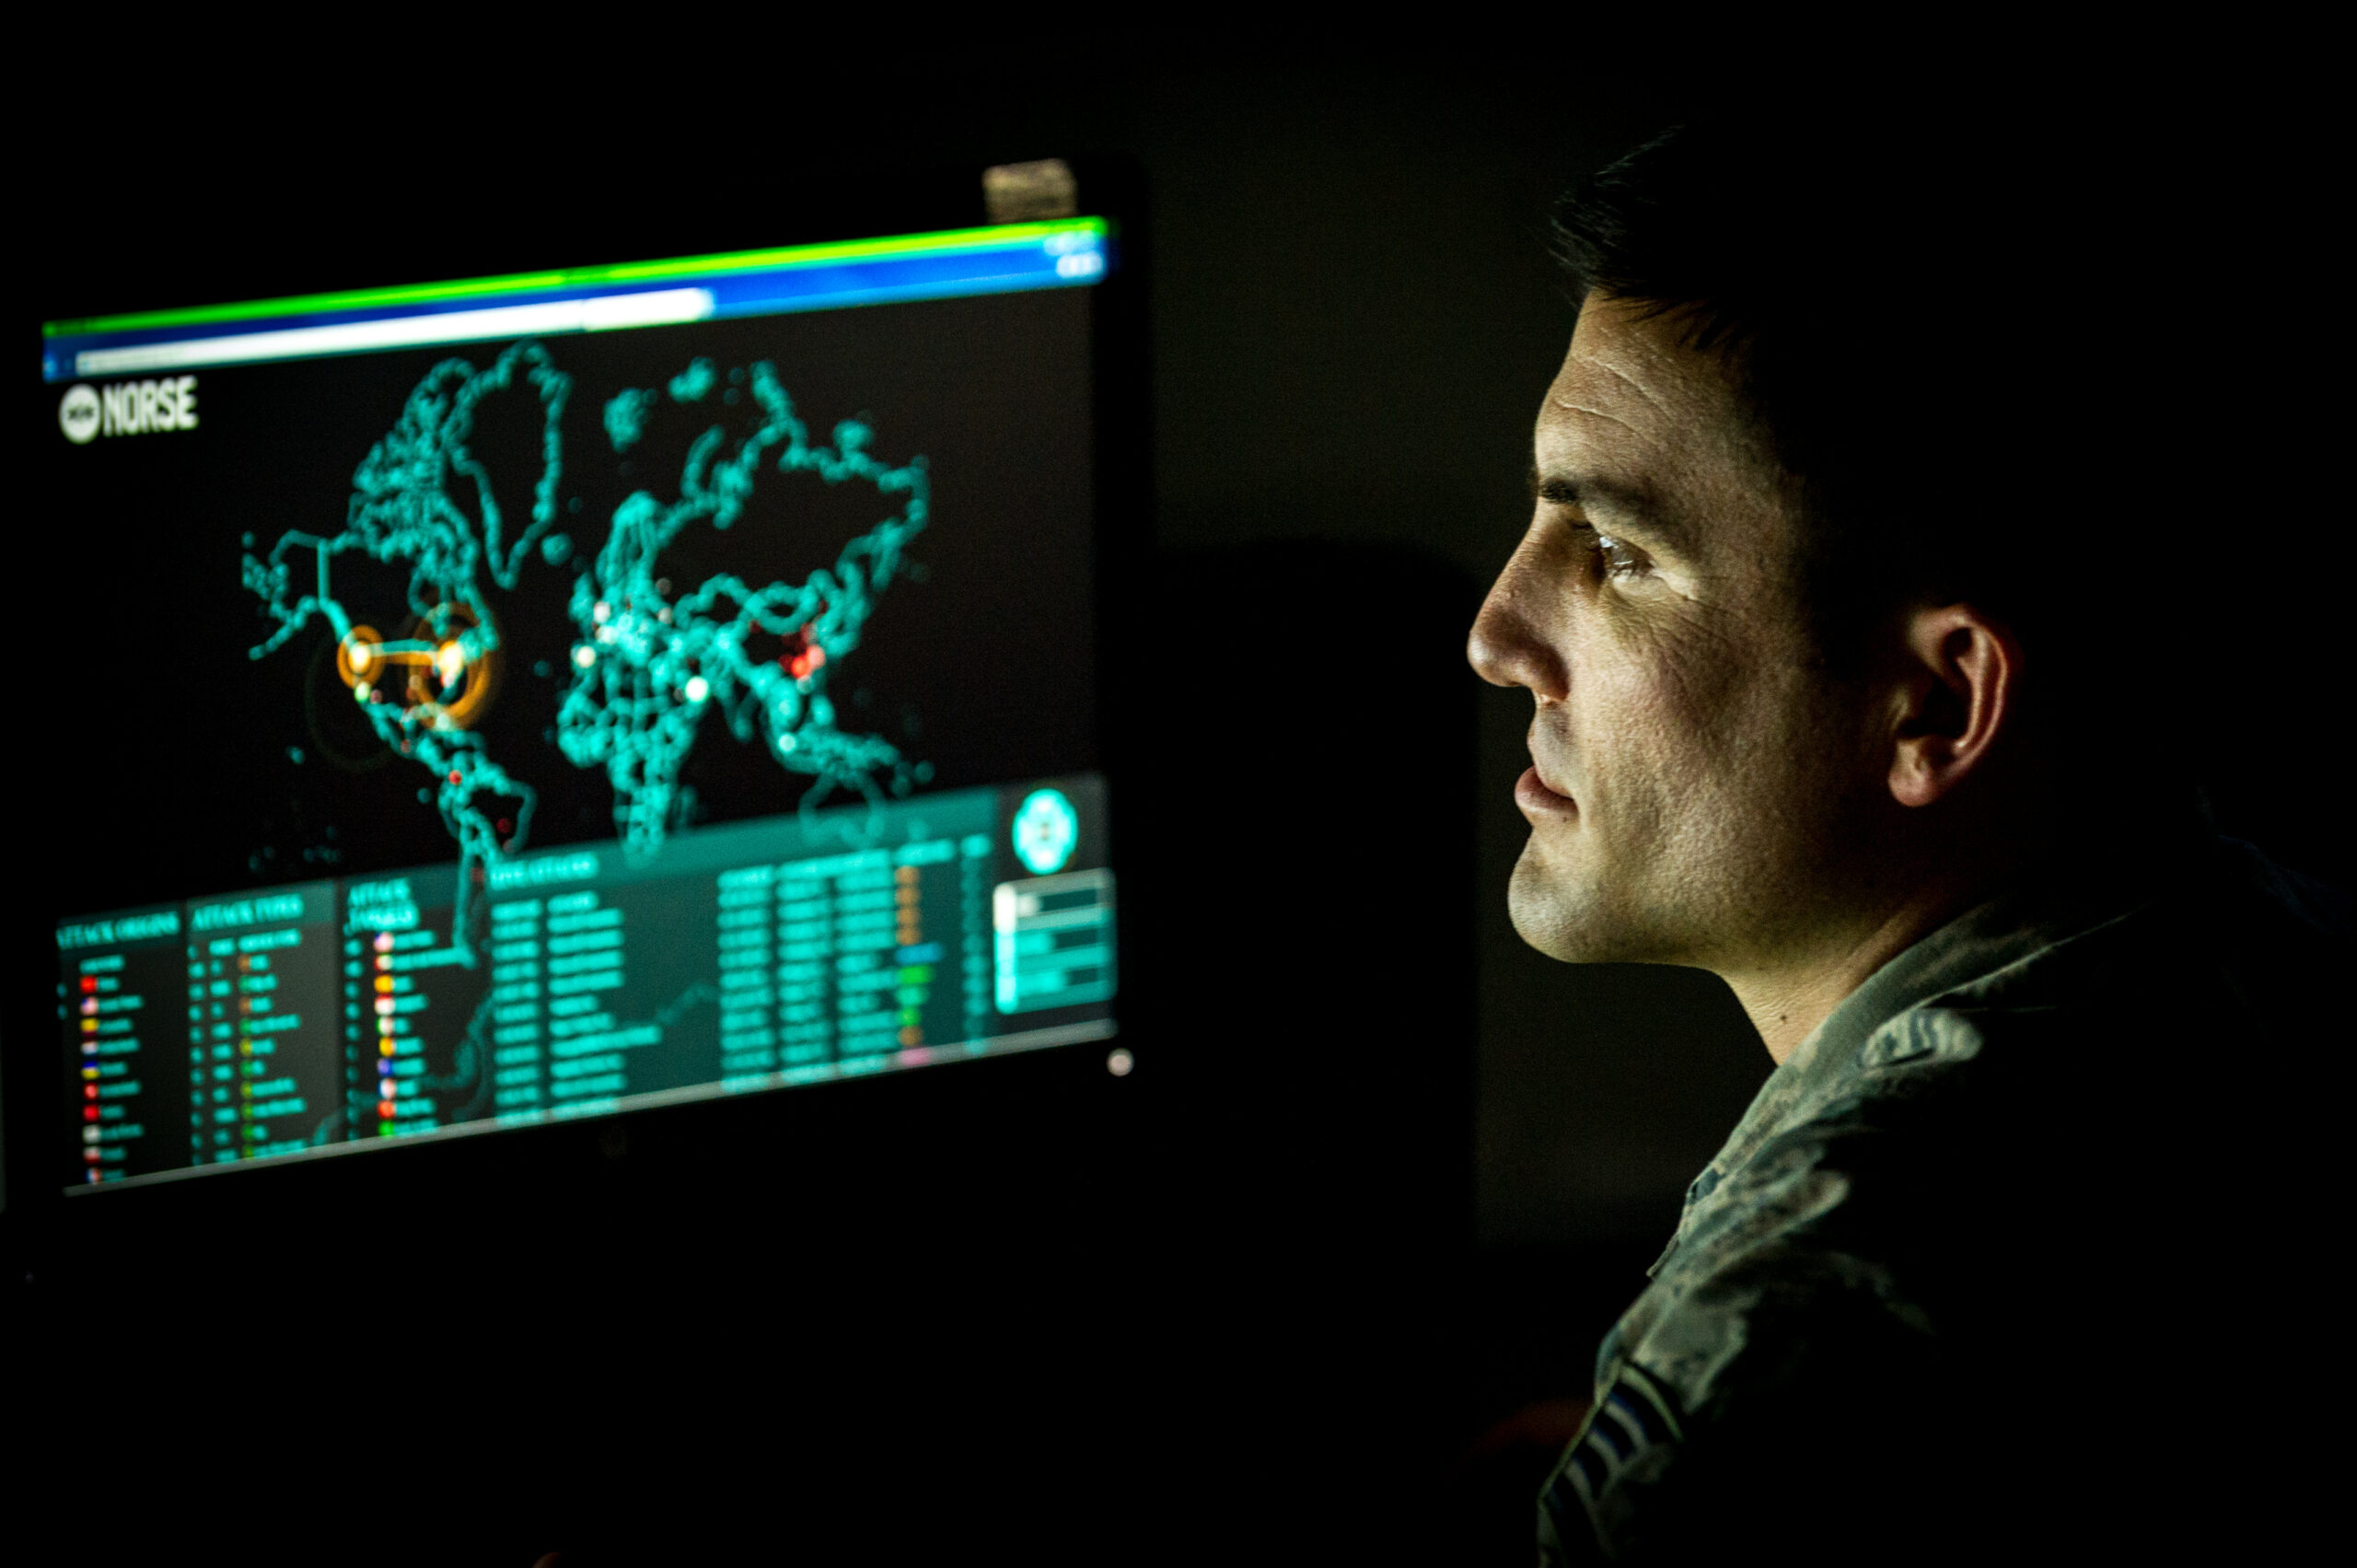 Cyber warfare operations journeyman assigned to the 175th Cyberspace Operations Group of the Maryland Air National Guard monitors live cyber attacks